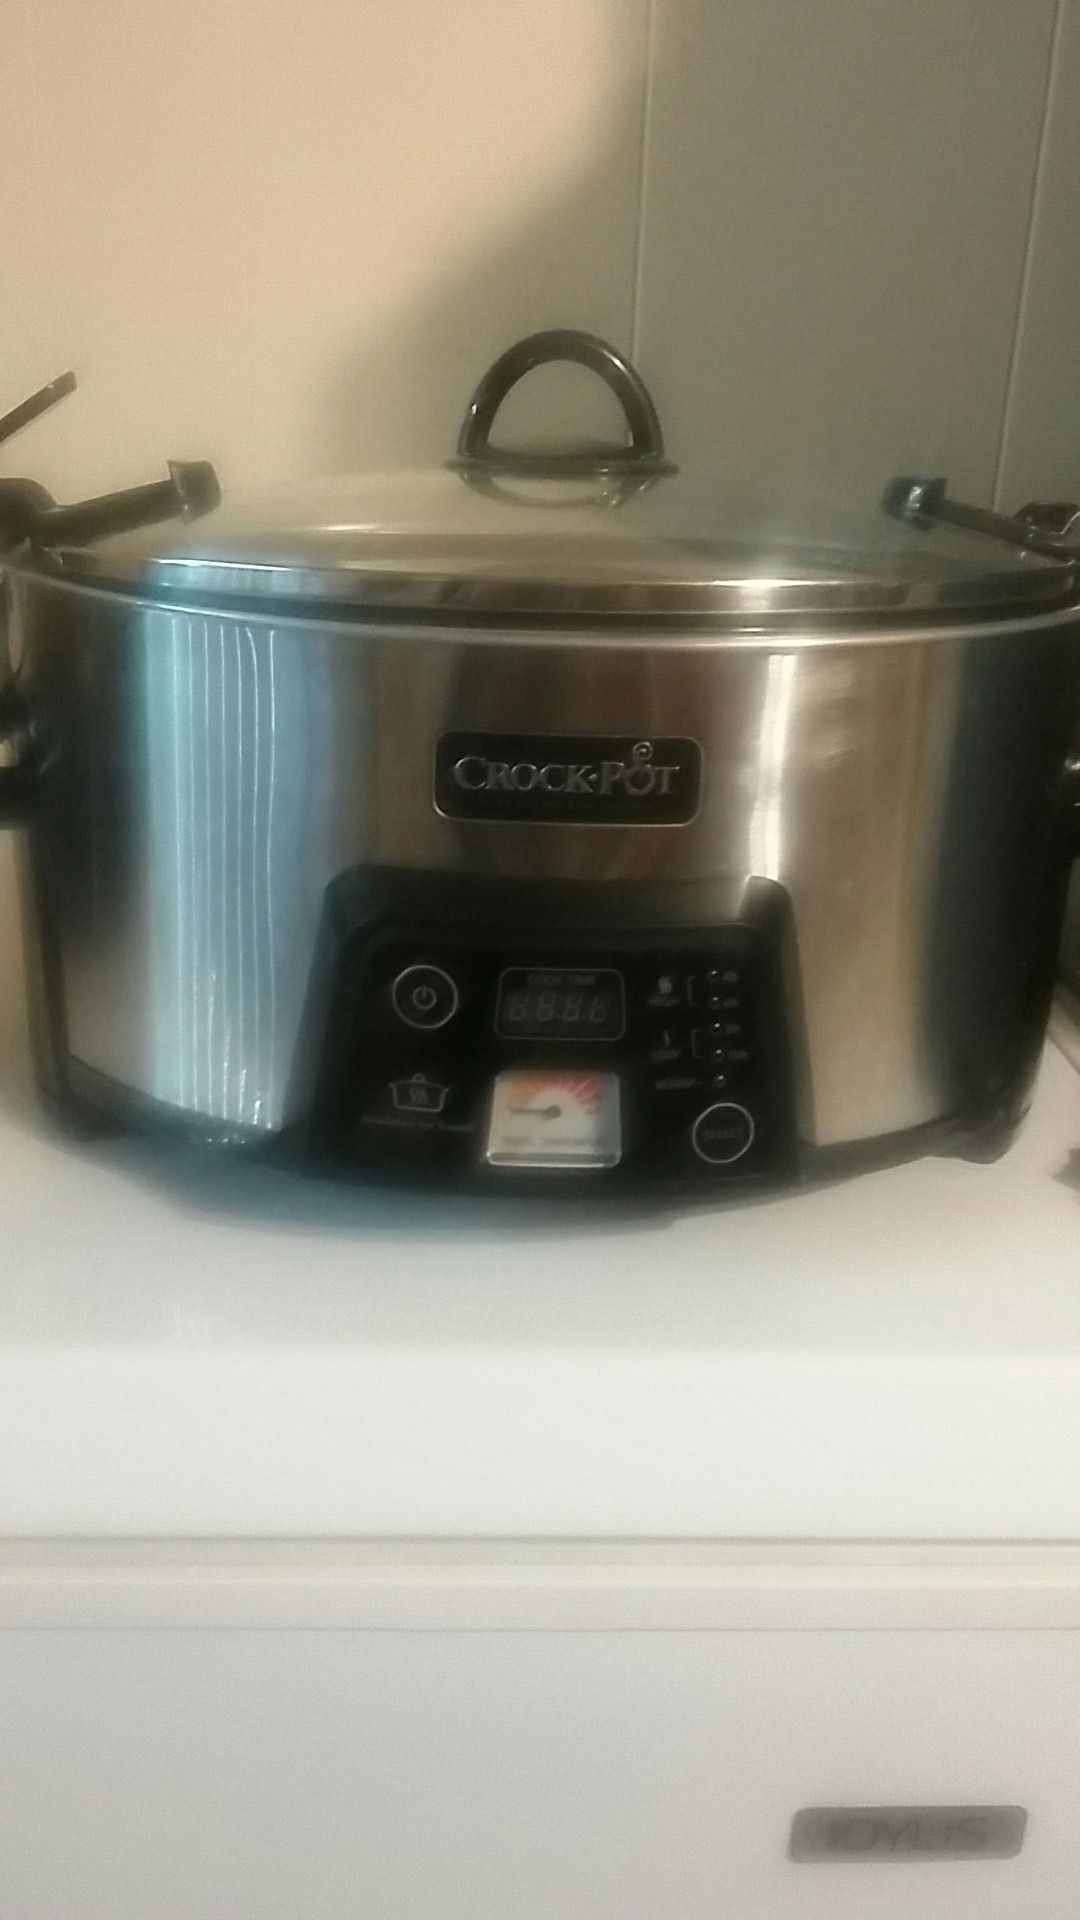 Crock pot slow cooker (one time use)